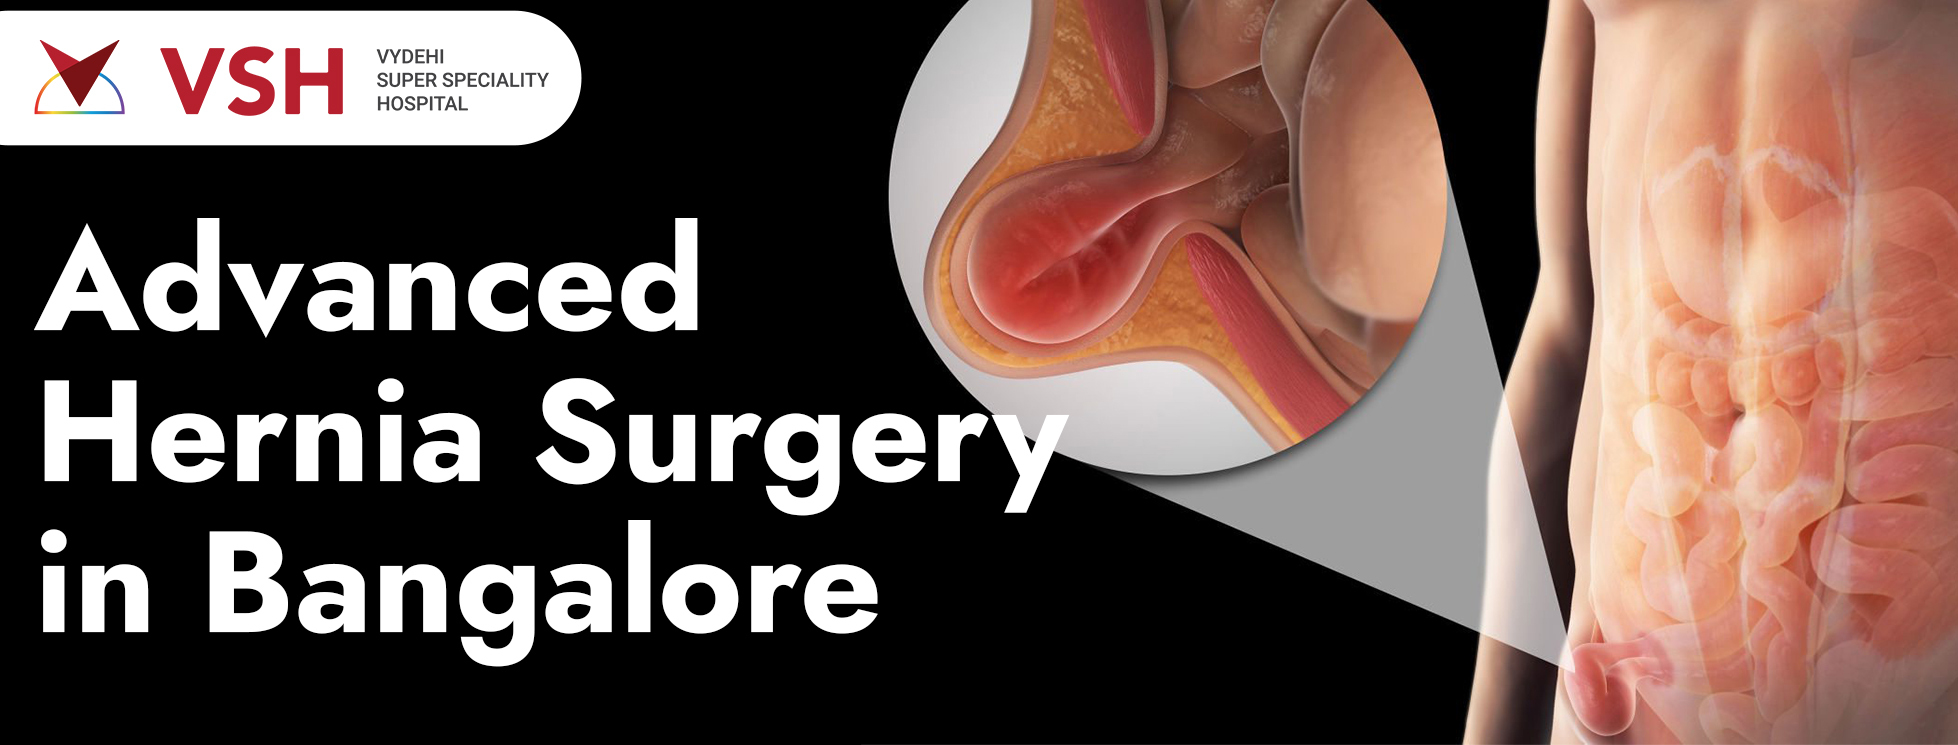 Hernia Surgery Doctors in Bangalore